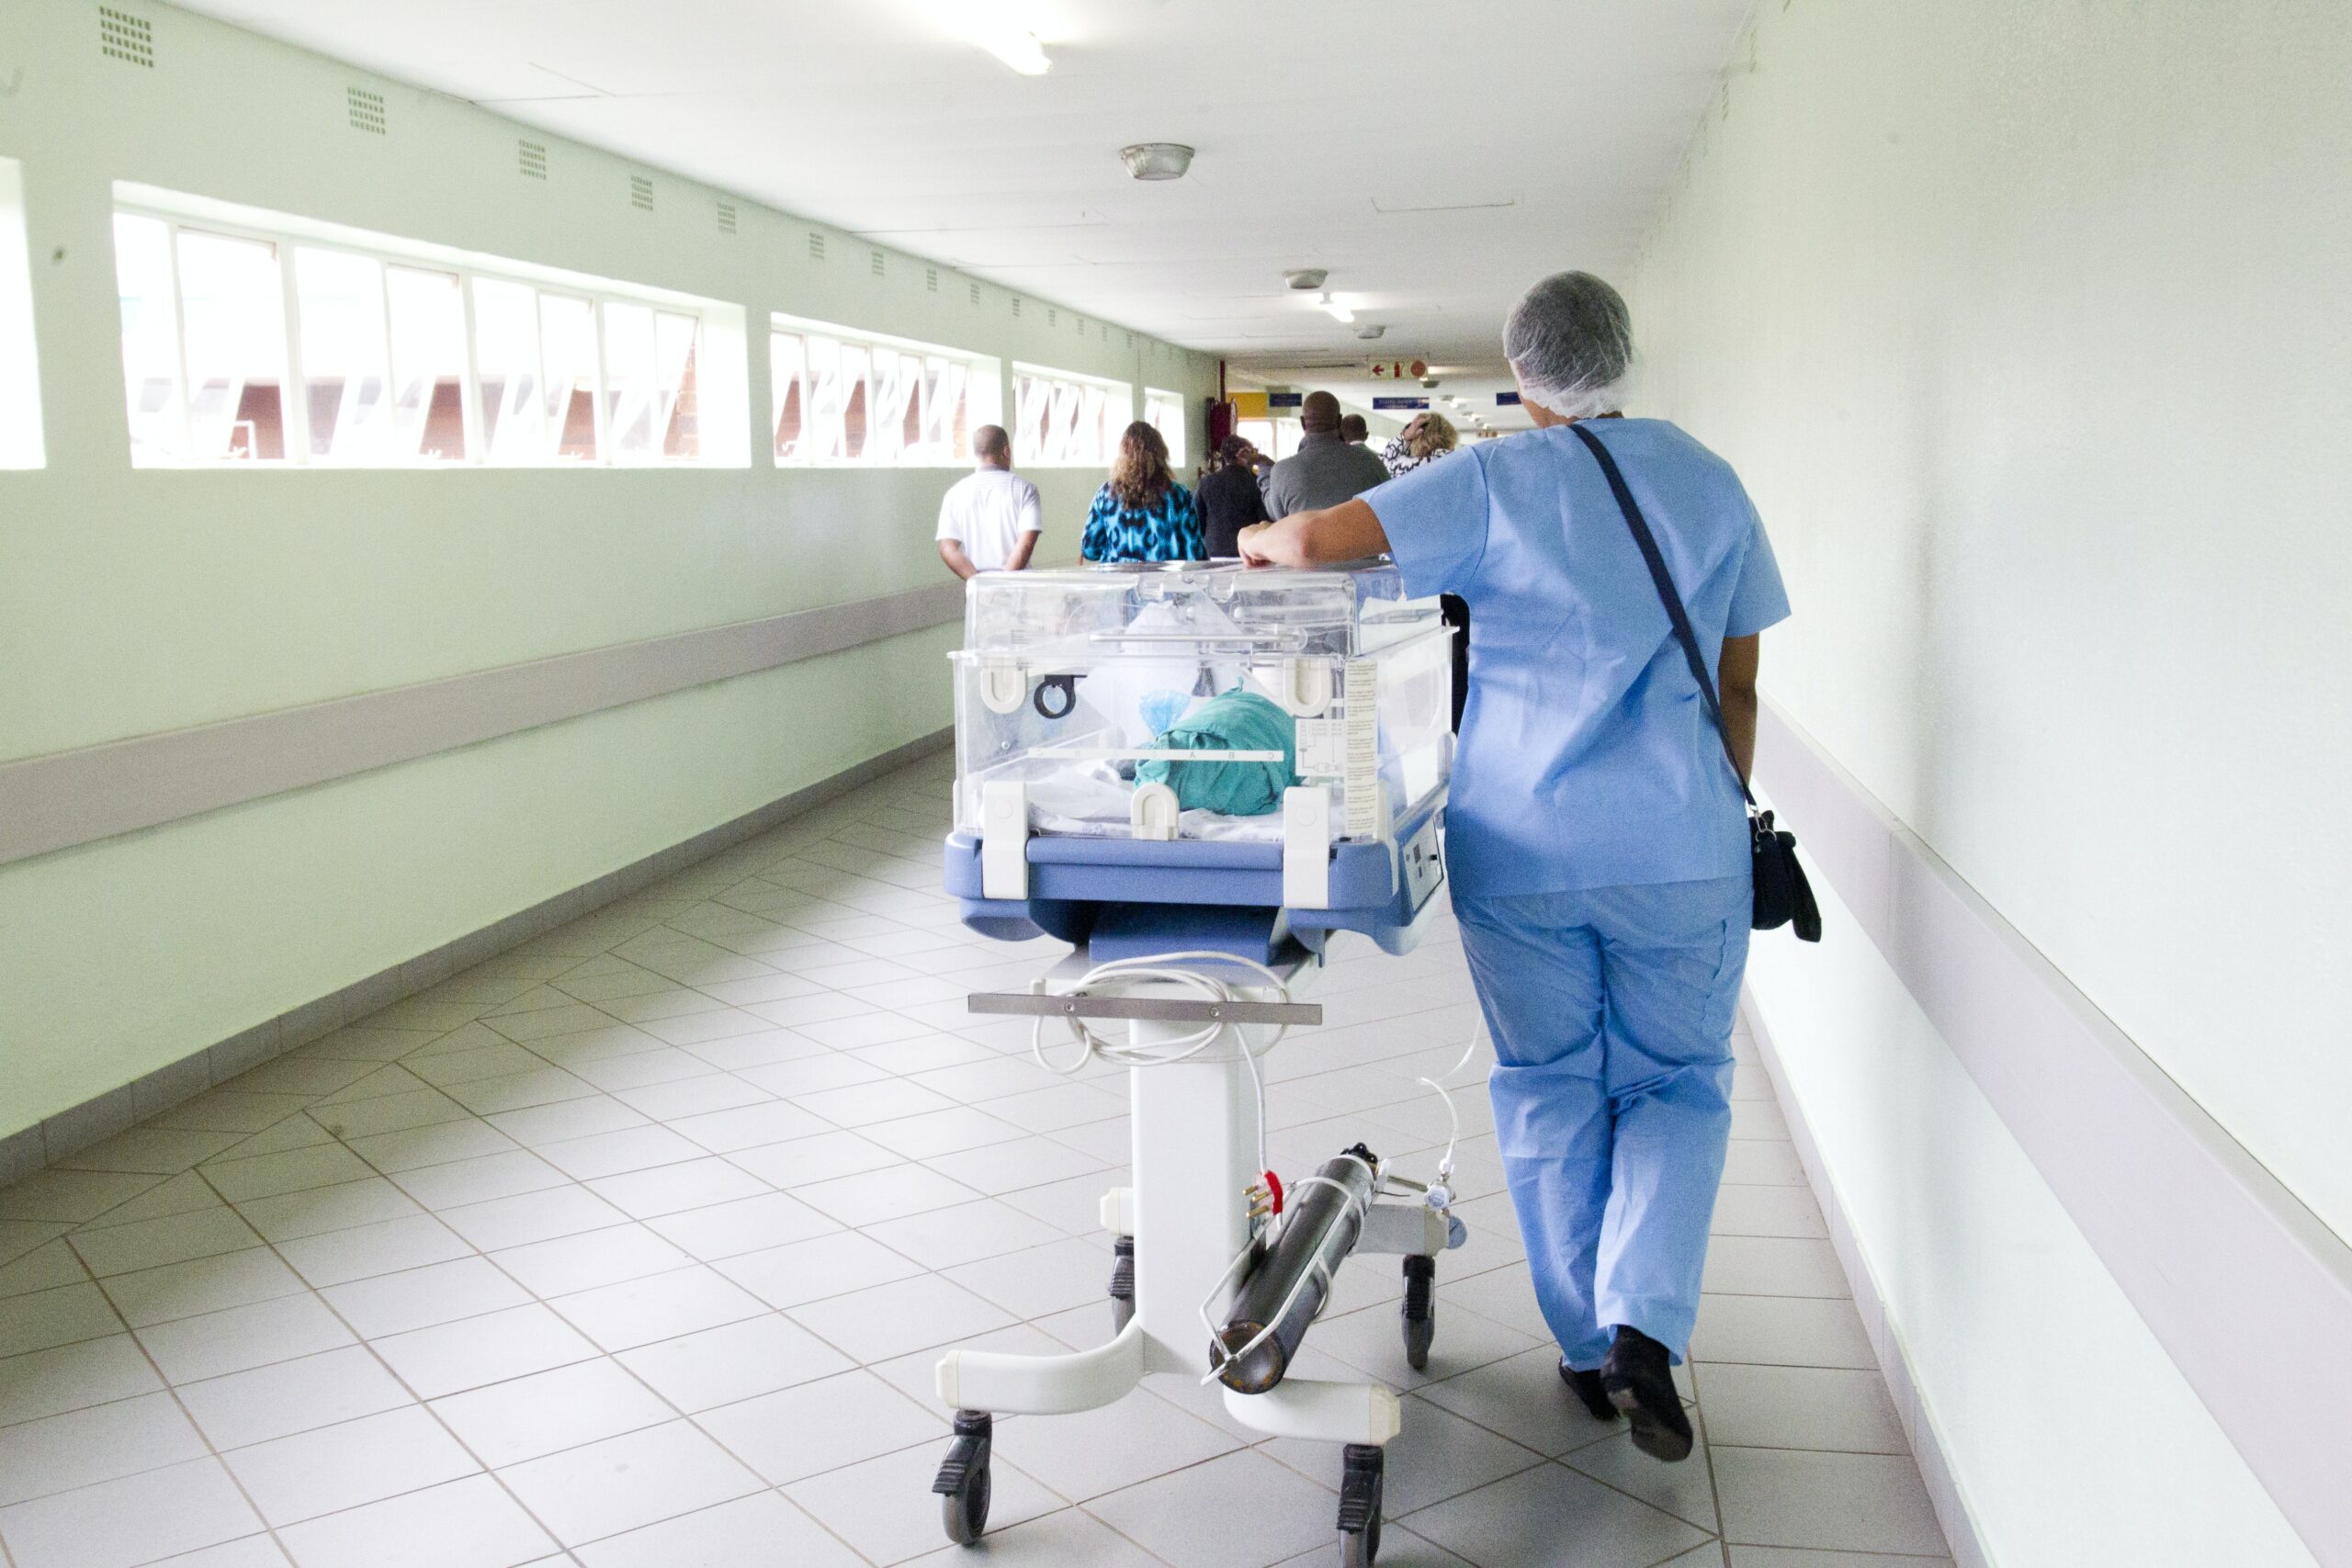 A nurse is walking down a hallway in a hospital with a baby on a cart.